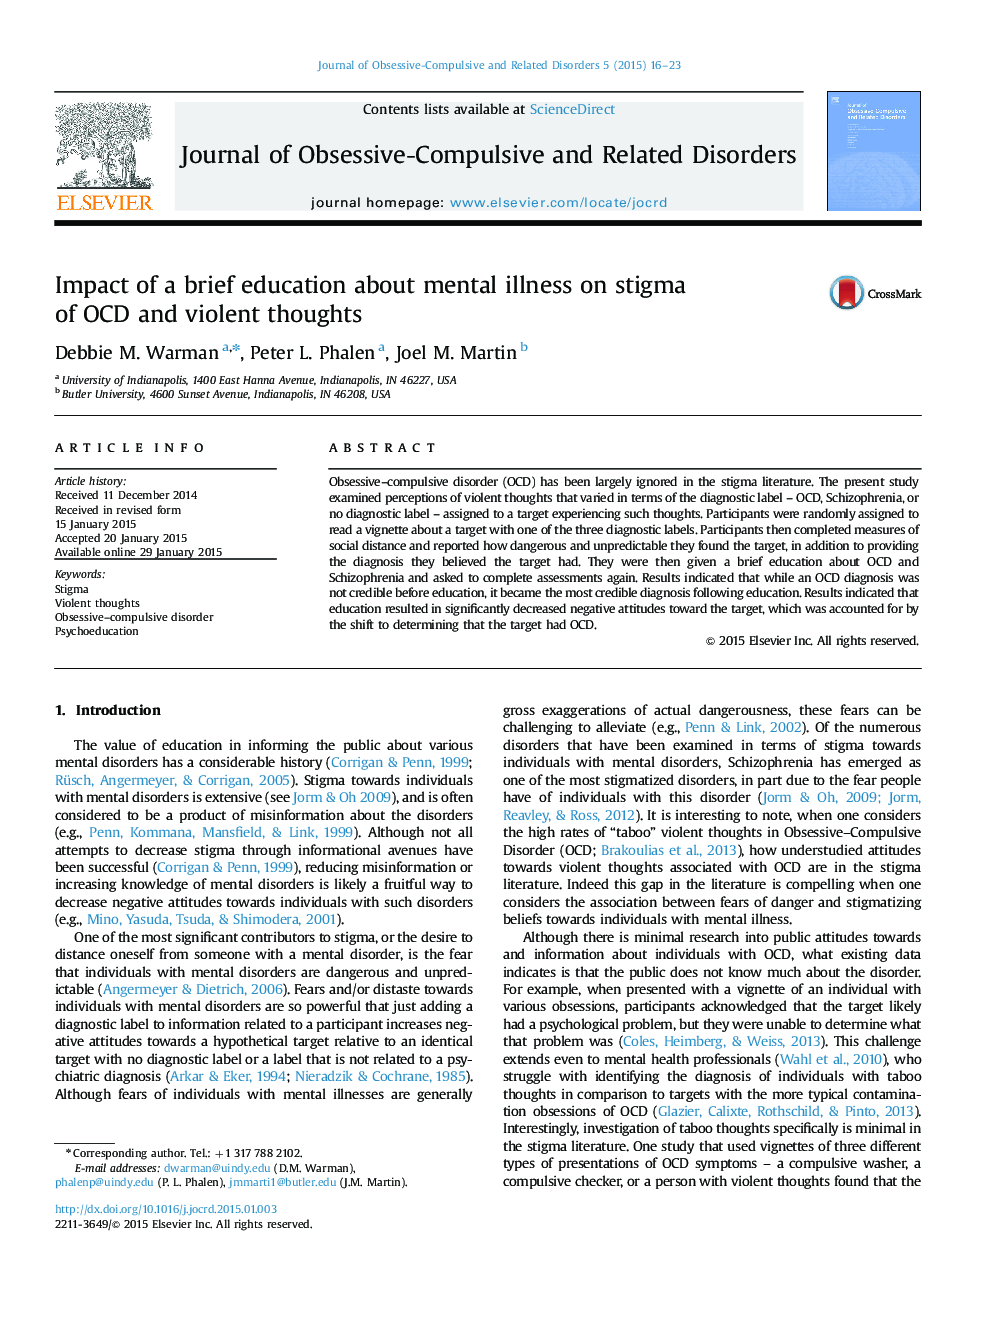 Impact of a brief education about mental illness on stigma of OCD and violent thoughts